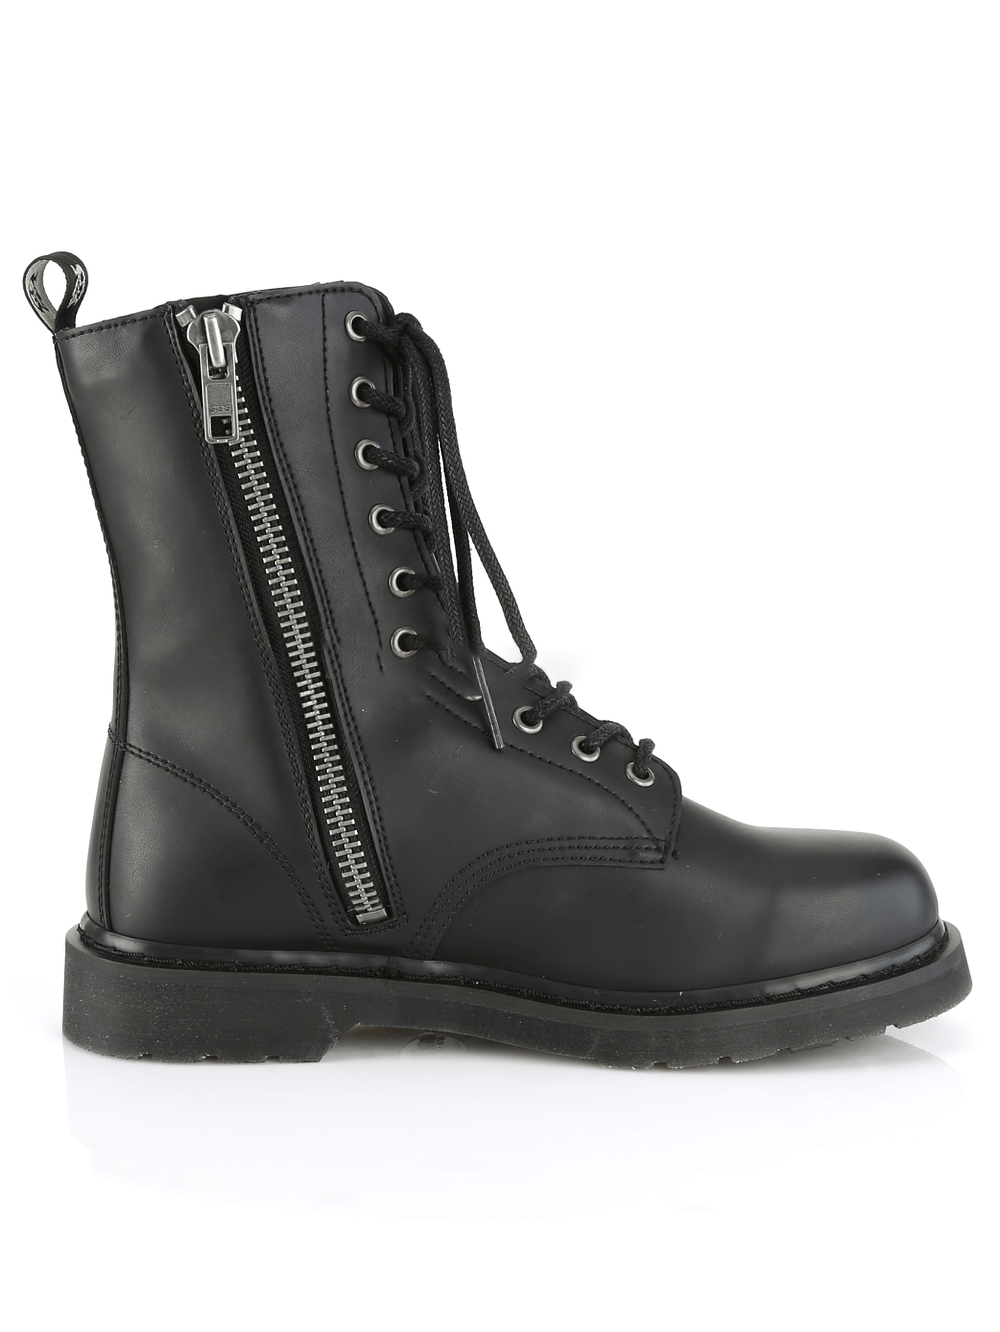 DEMONIA Eco-Friendly Lace-Up Vegan Boots with Zip Closure